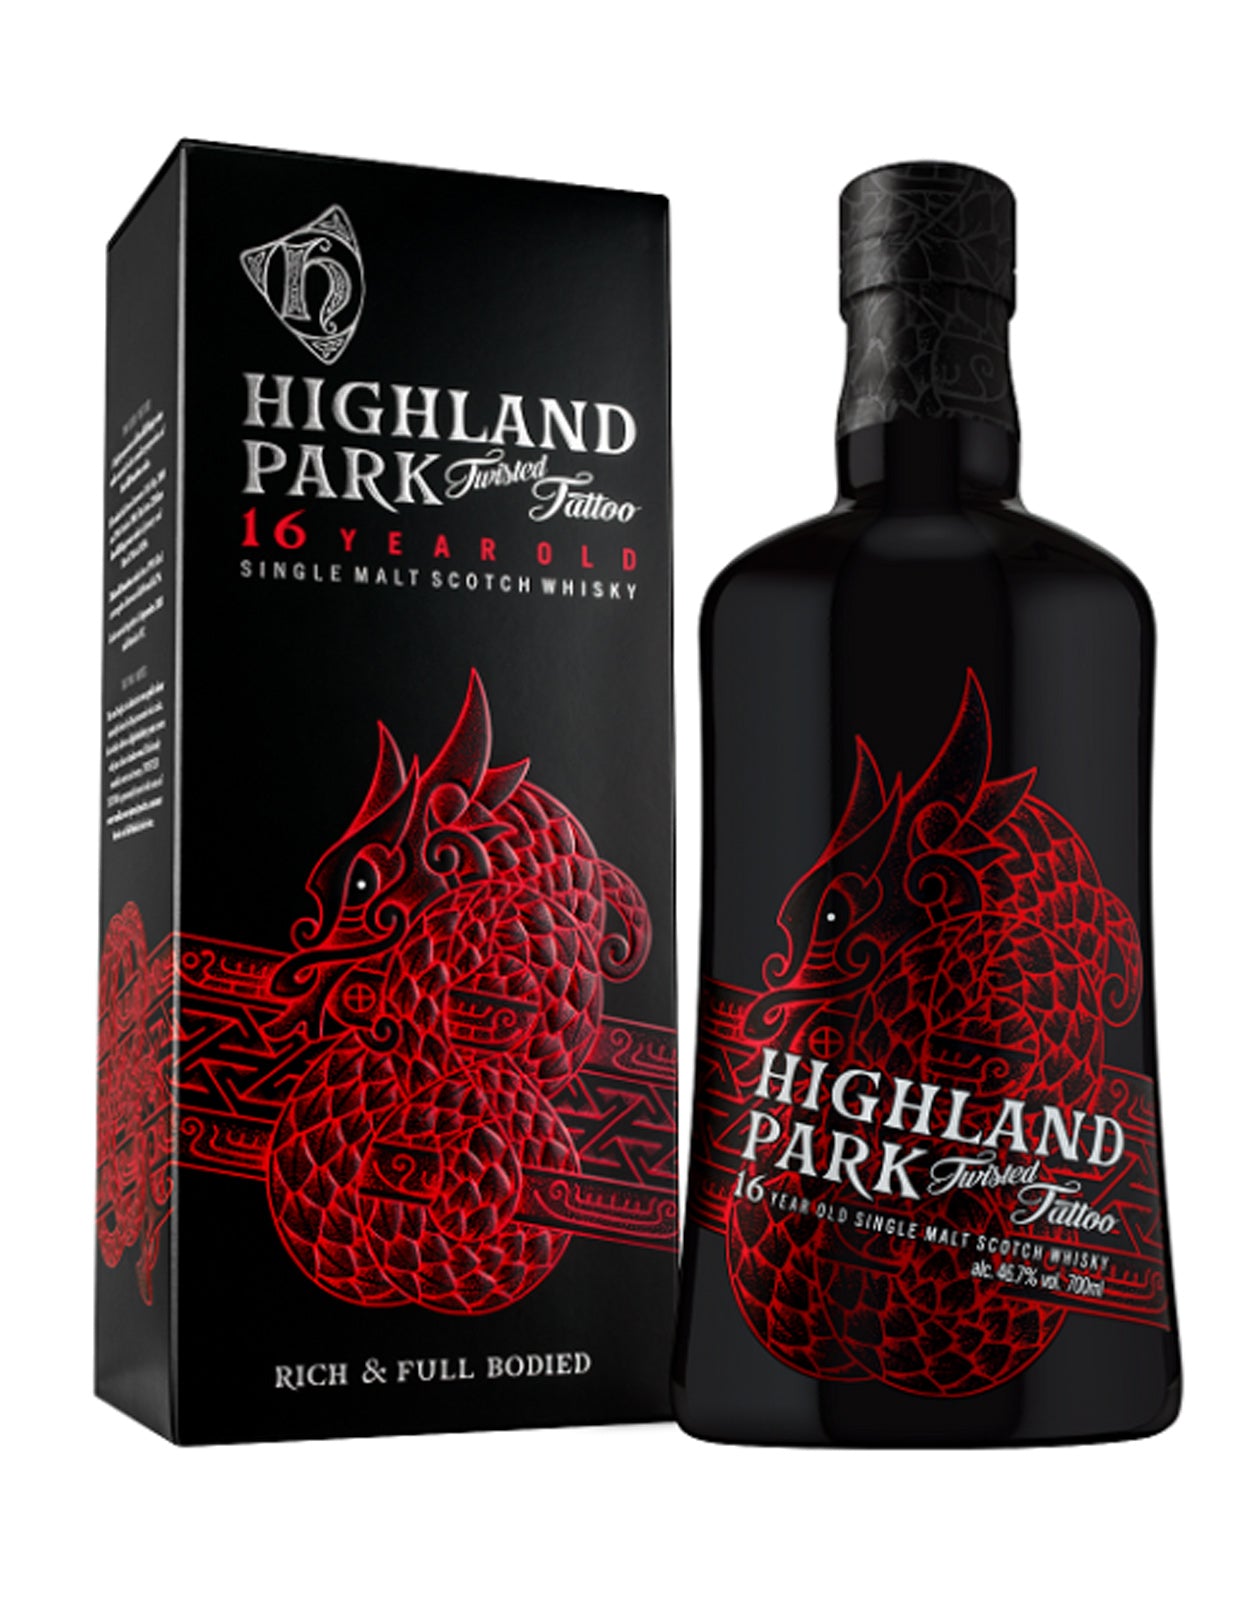 Highland Park 16 Year Old "Twisted Tattoo"